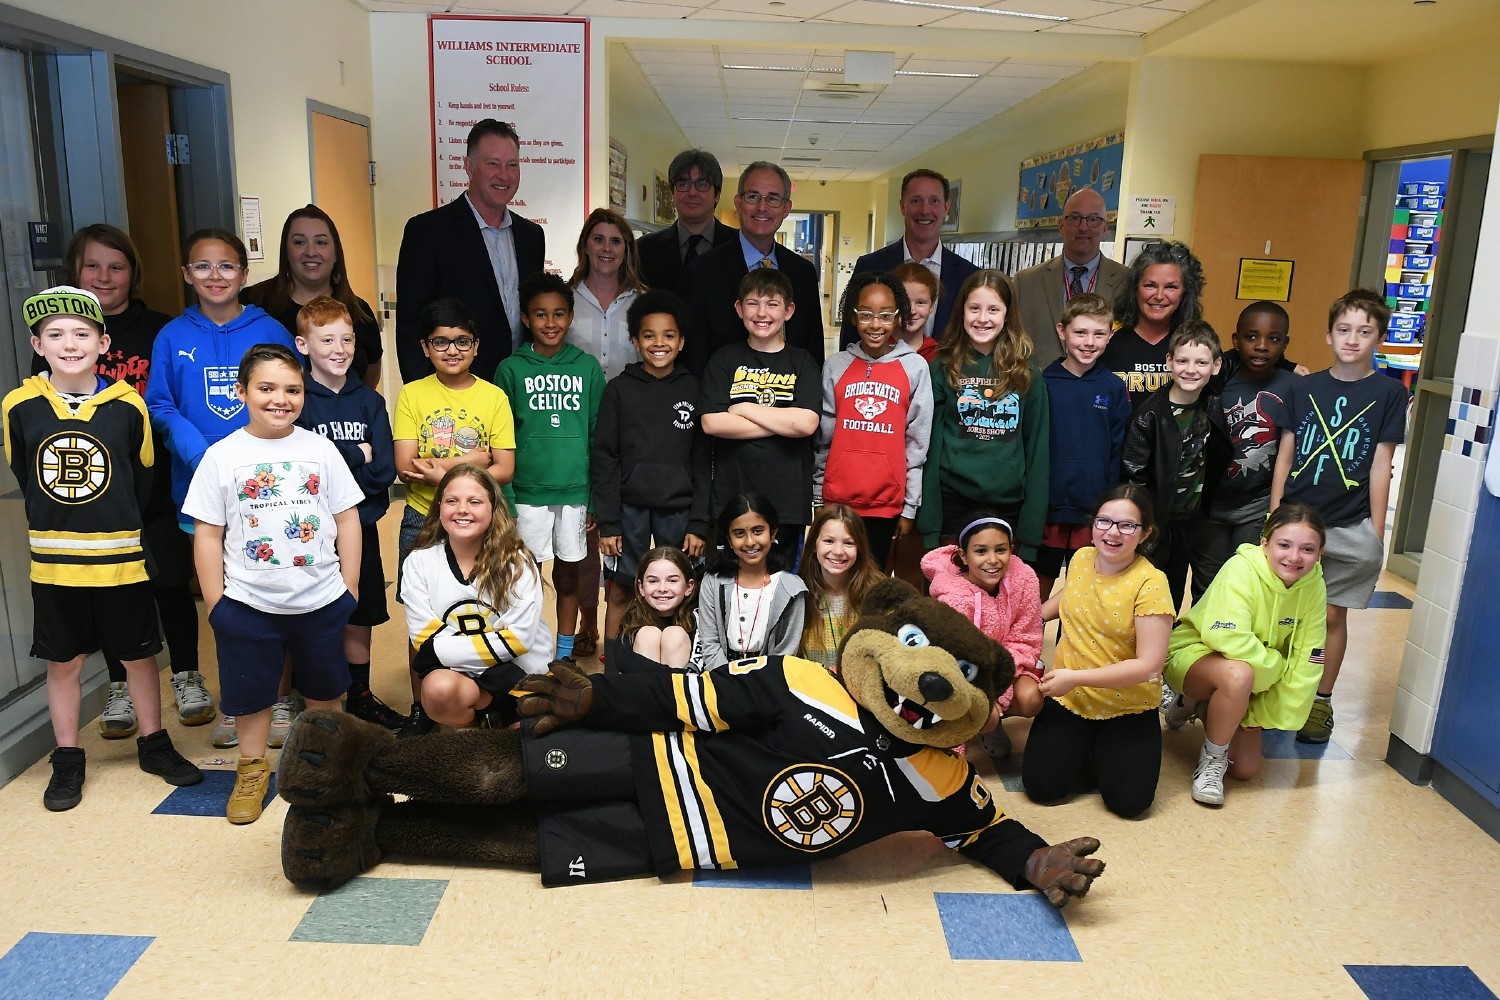 STEM Lab ribbon cutting at Williams Intermediate School in partnership with the Boston Bruins Foundation